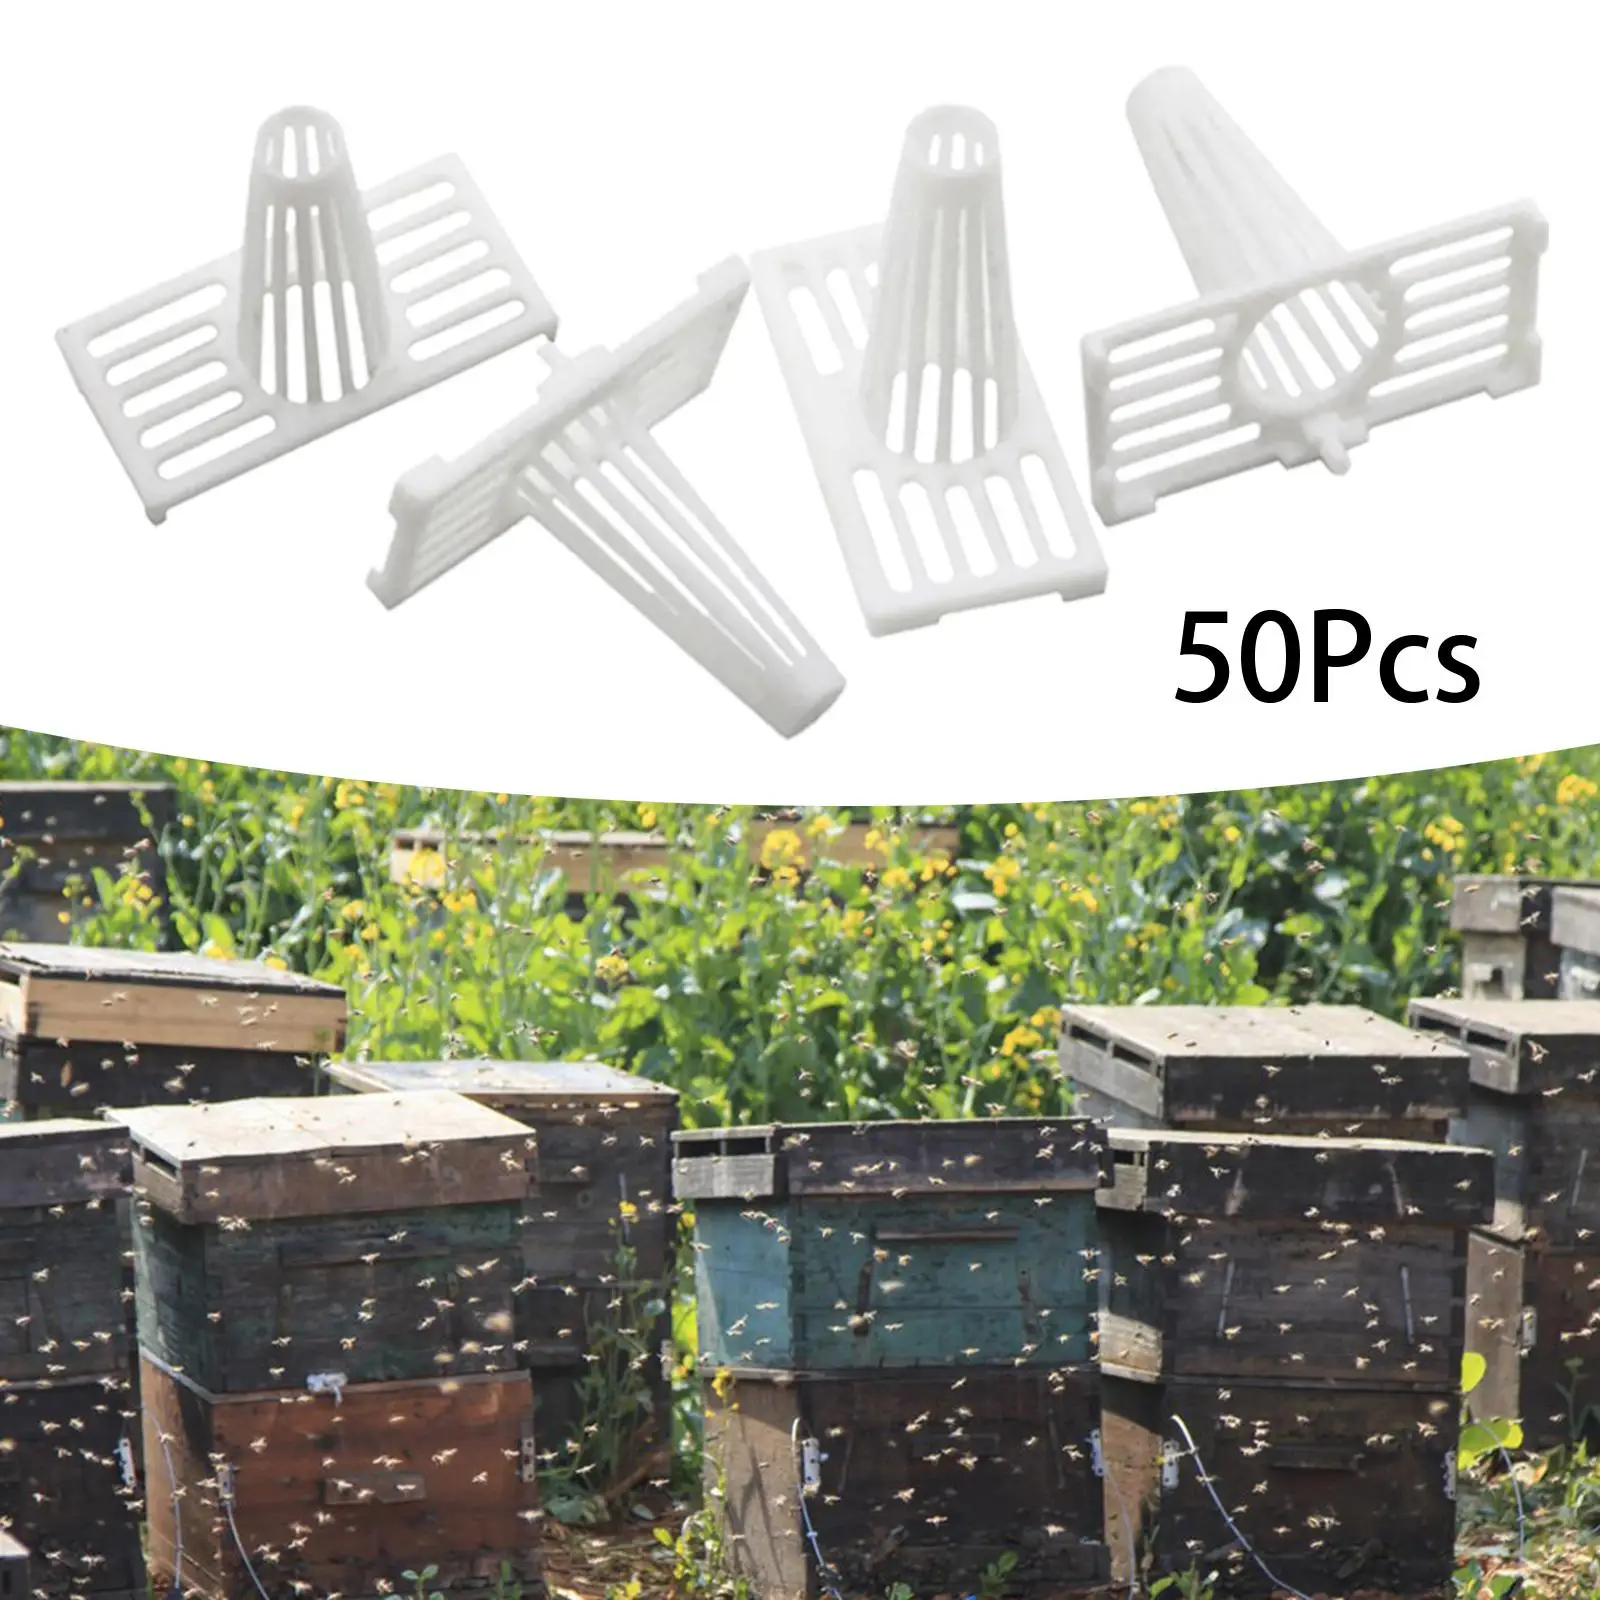 50Pcs Bee Hive Frame Nest Gate Beekeeping Supplies Farm Durable Portable Reusable Equipment Simple to Use Beehive Accessories